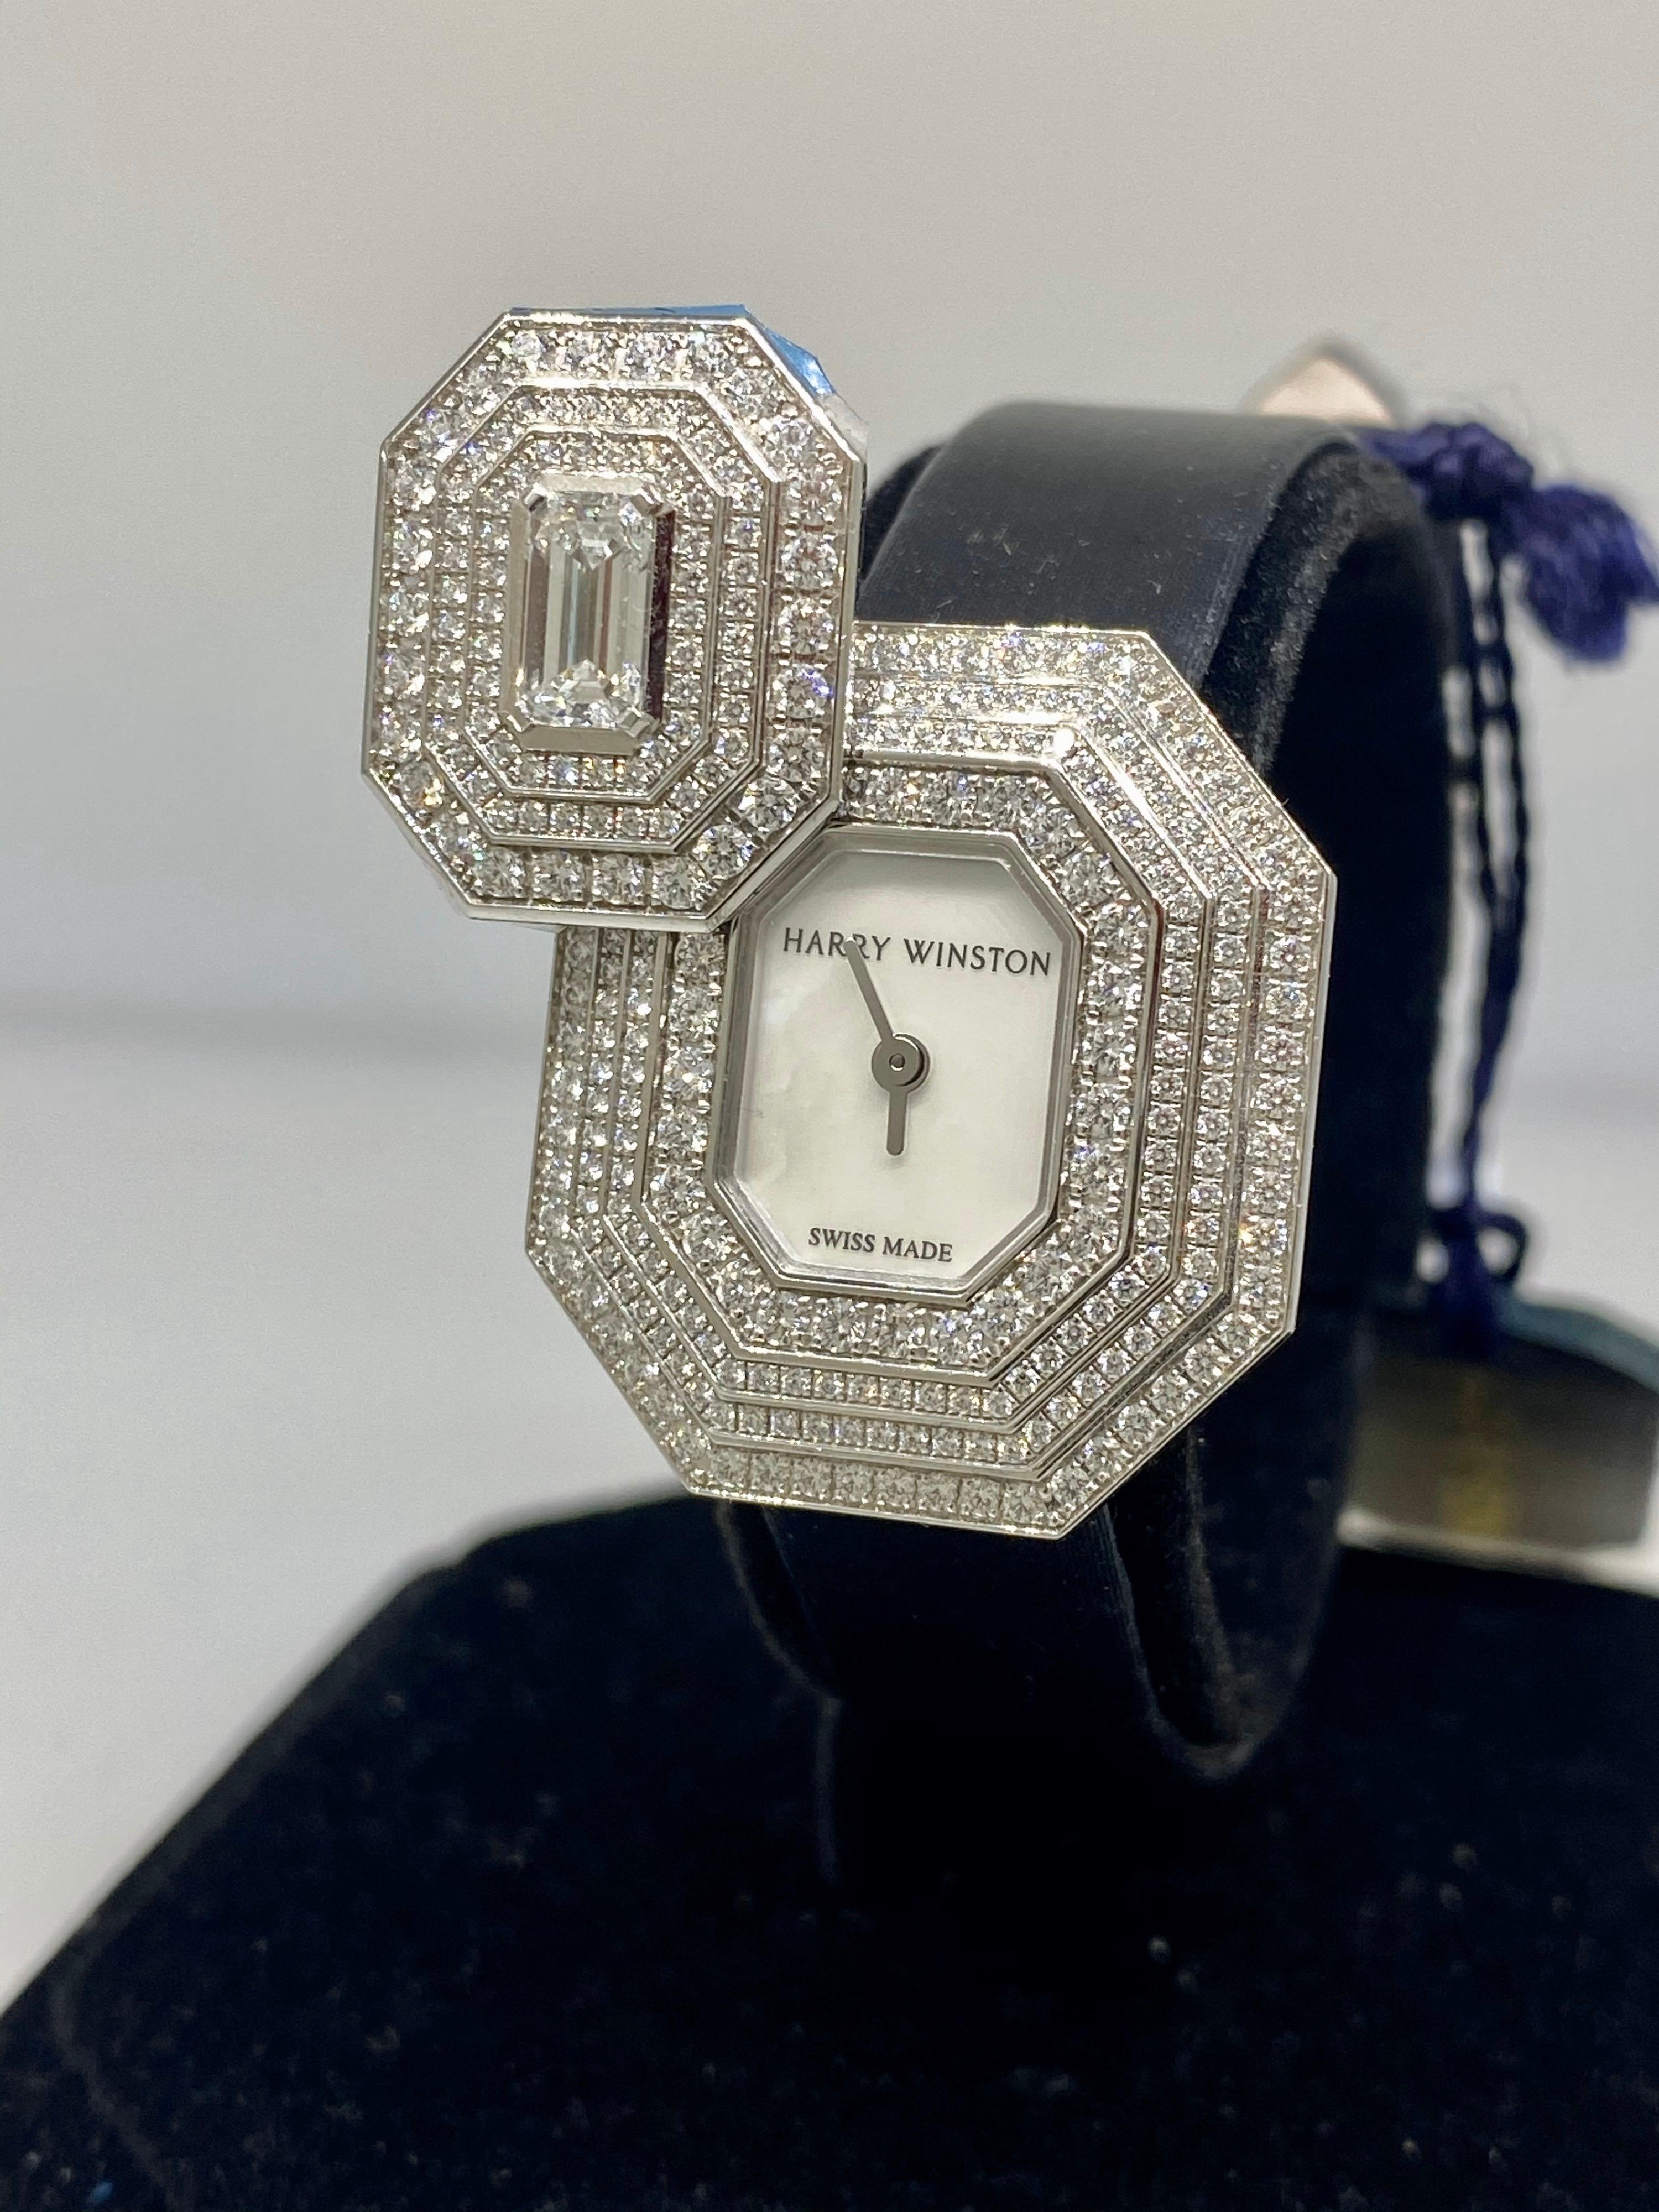 Harry Winston Emerald Signature Diamond Ladies Watch

Model Number: 542/LQWL.M/02 (HJTQHM24WW005)

100% Authentic

Brand New

Comes with original Harry Winston Box and Papers

18 Karat White Gold Case

Mother of Pearl Dial

Case dimensions: 24mm x